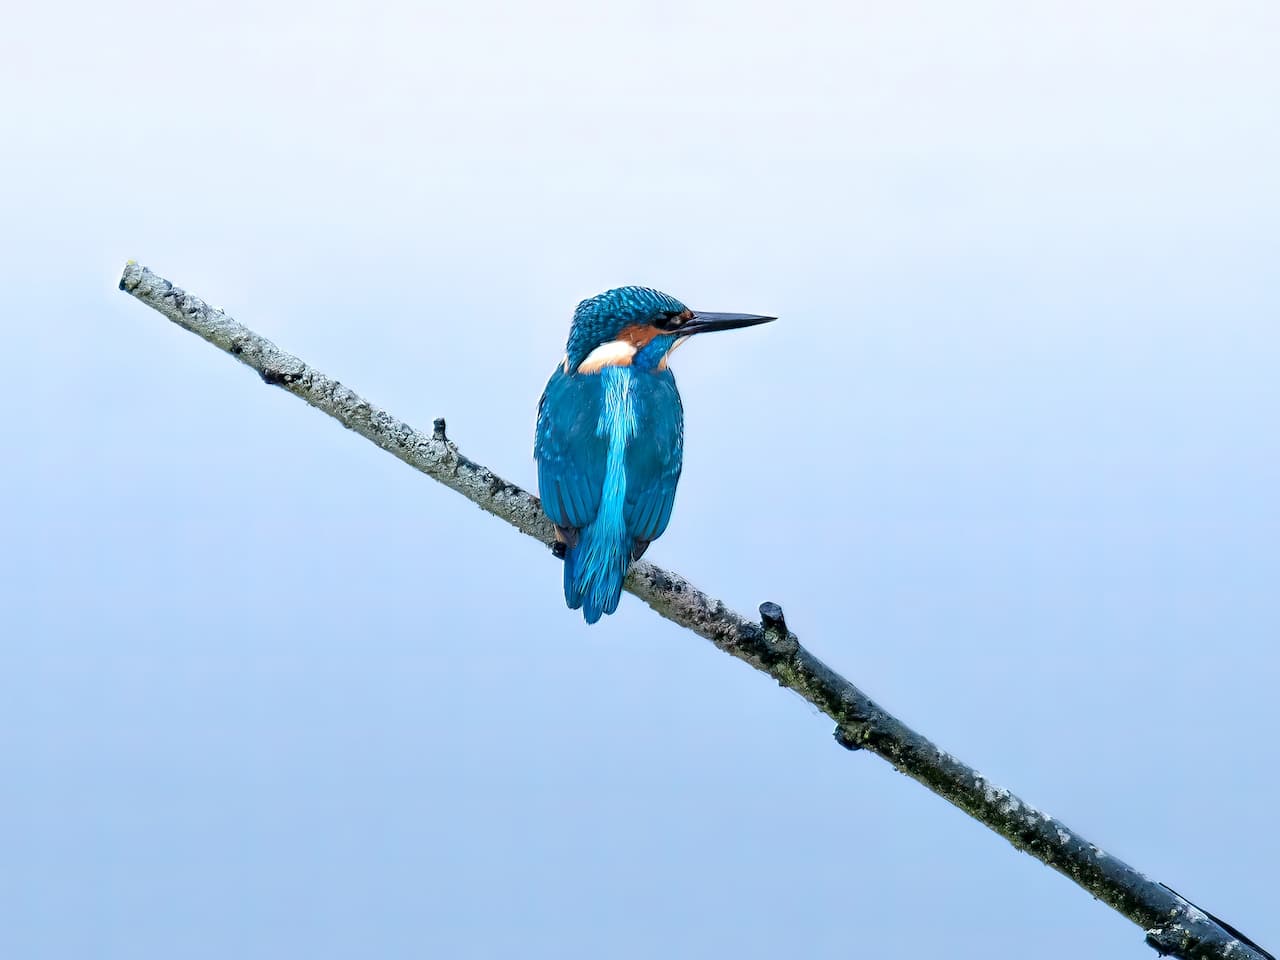 A Bird On The Edge Of A Tree Branch